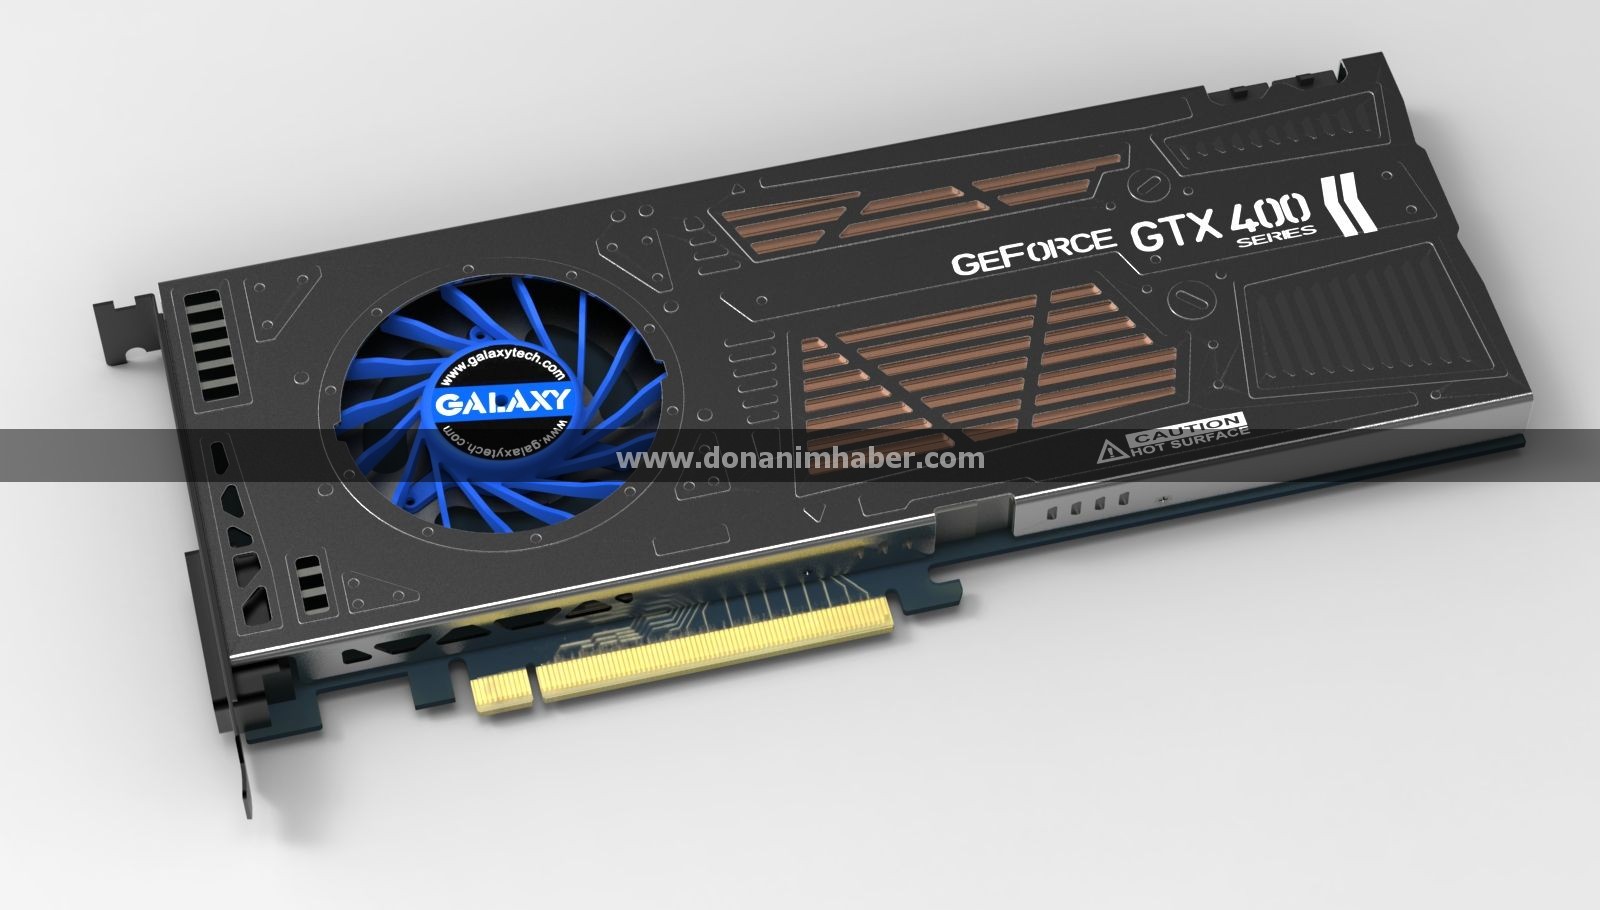 Media asset in full size related to 3dfxzone.it news item entitled as follows: Galaxy realizza una GeForce GTX 460 con cooler single-slot | Image Name: news14173_1.jpg